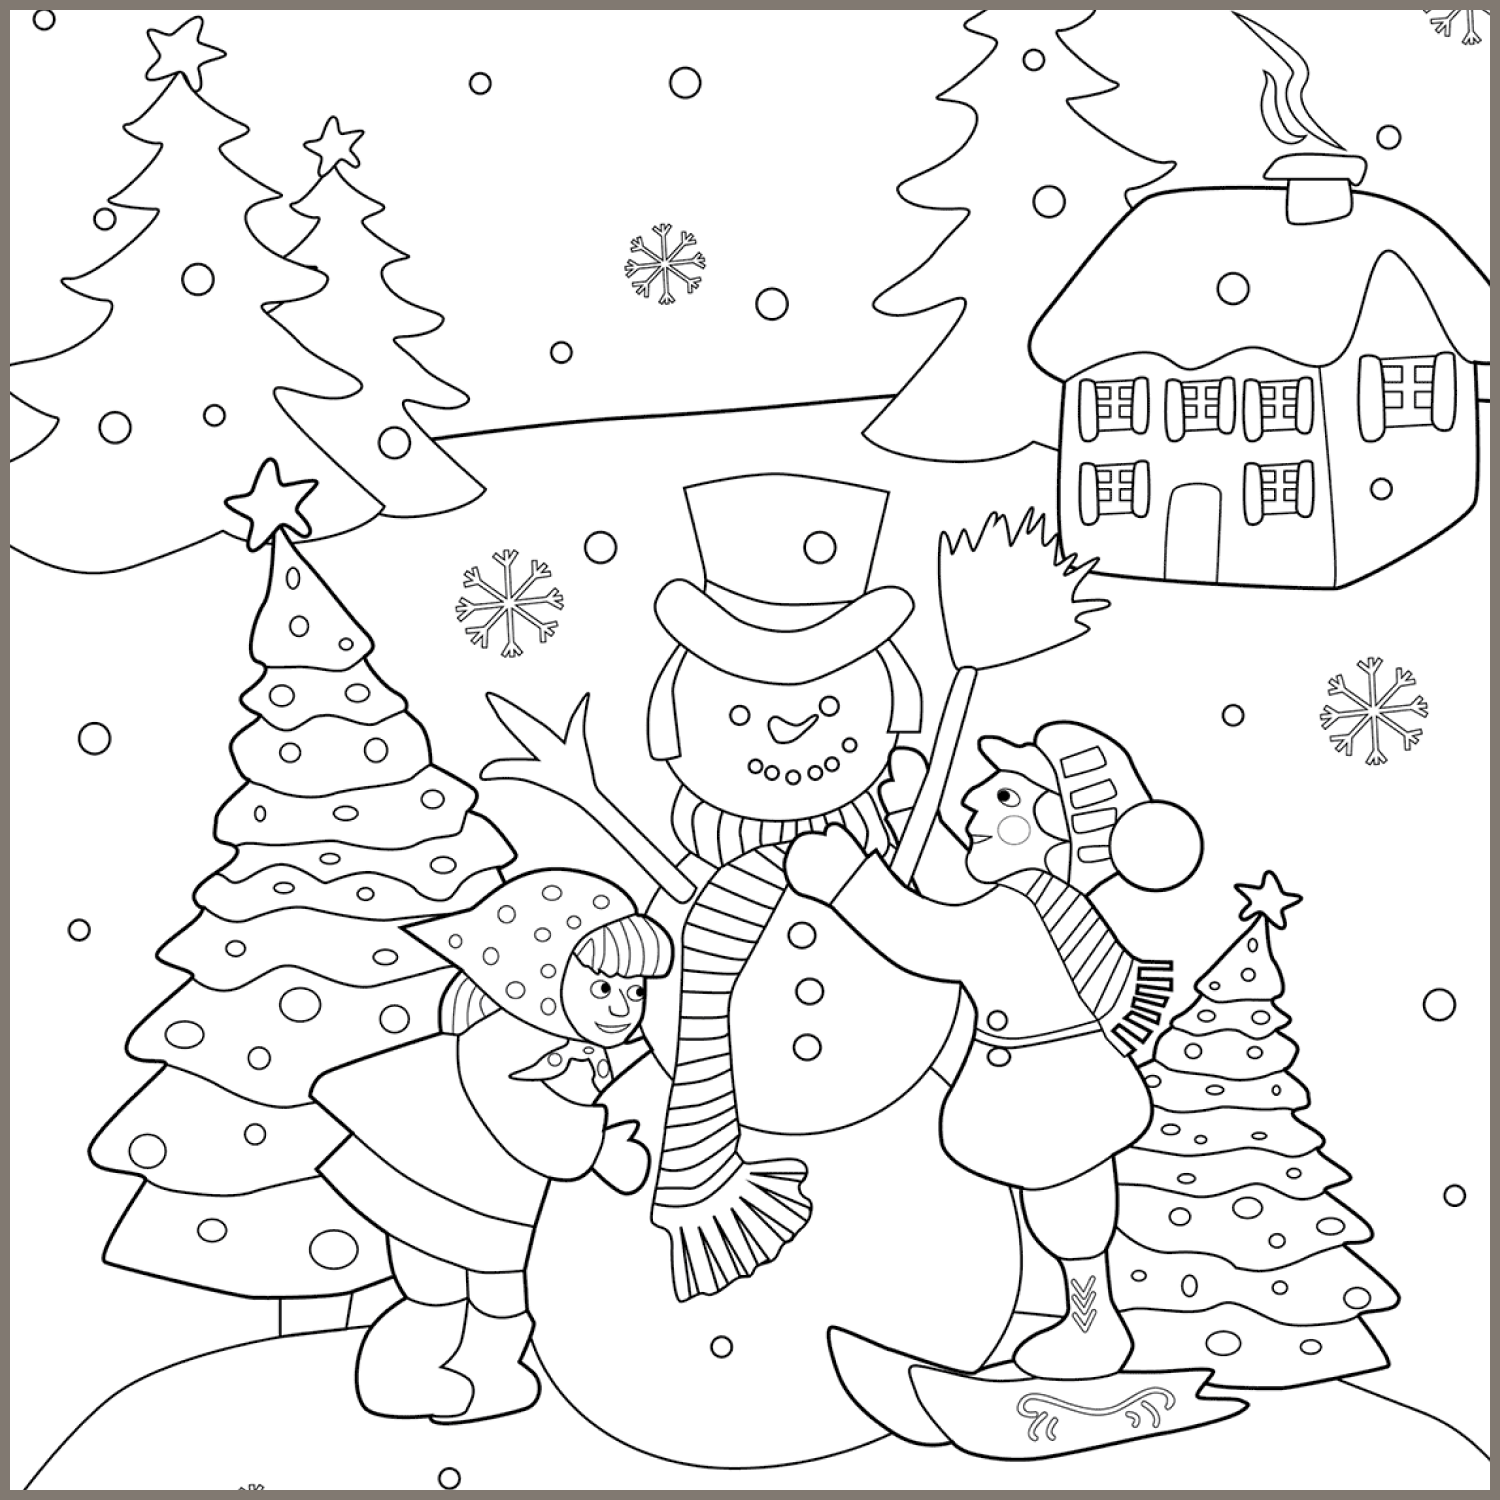 Boy and Girl Building a Snowman coloring page cover image.